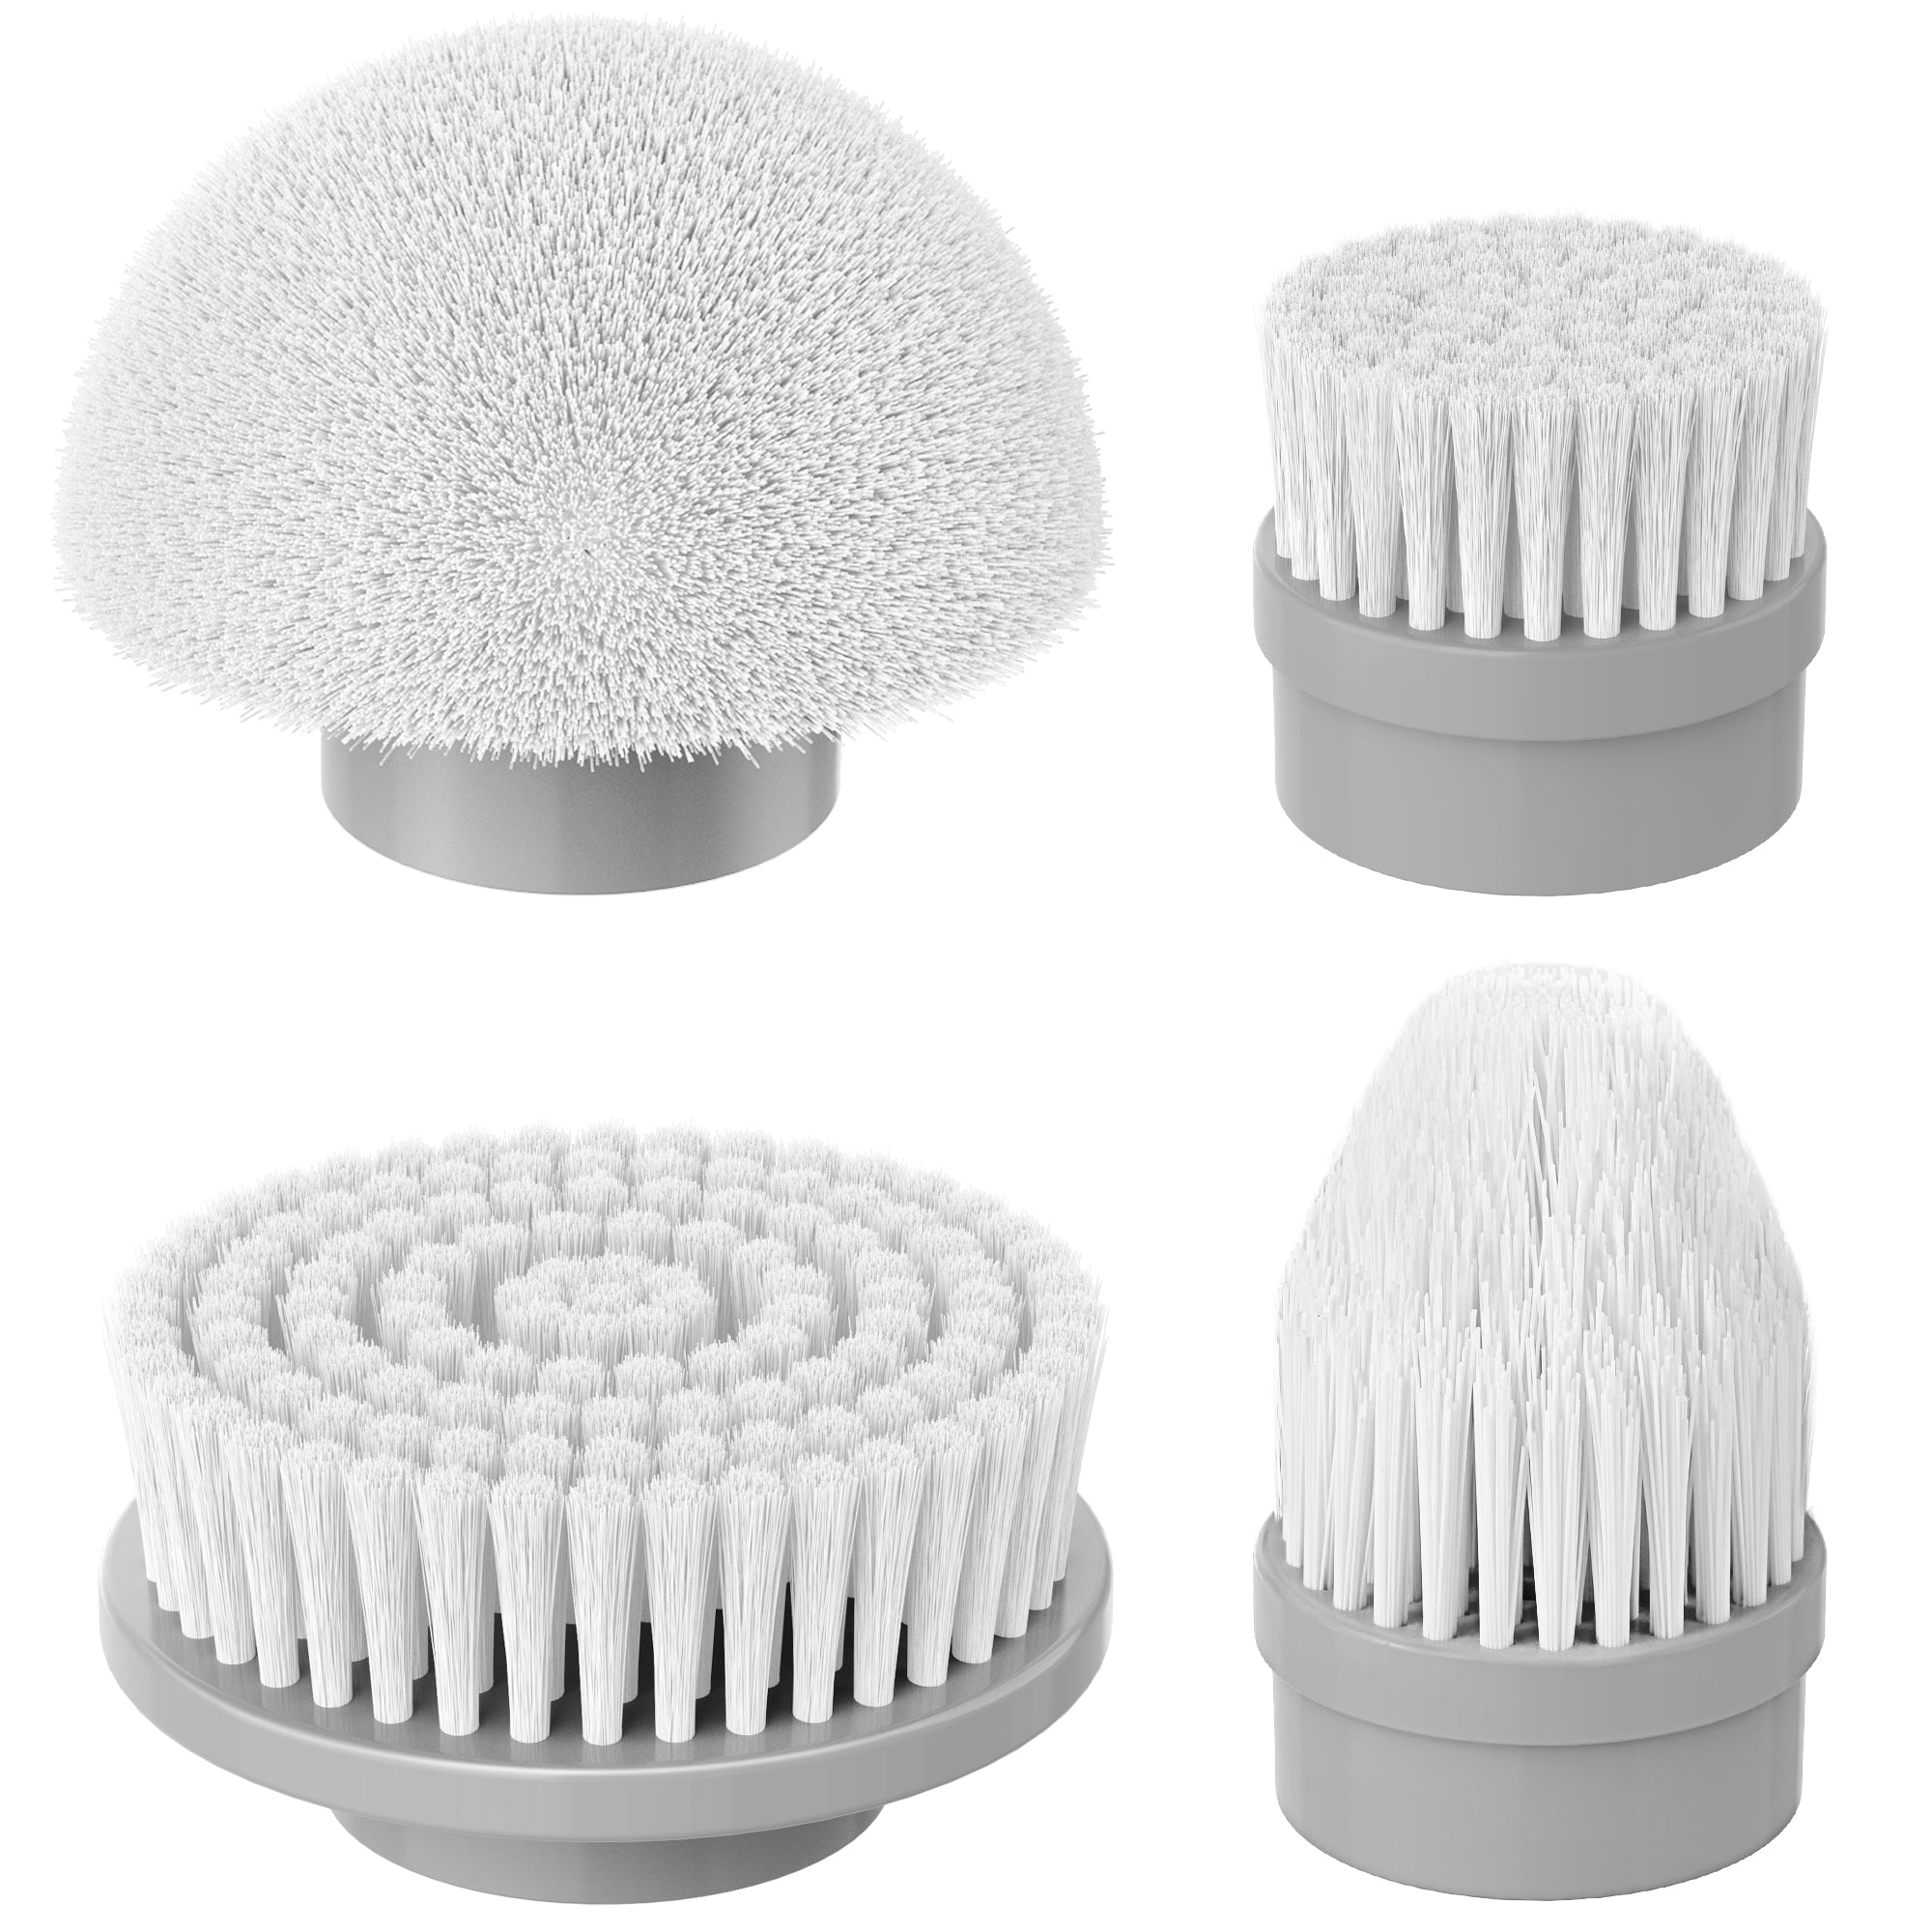 Replacement Brush Heads for Hurricane Spin Scrubber with Multi-Function Set  of 3（Flat,Dome,Corner） and Adapter for Bathroom, Floor, Wall and Kitchen